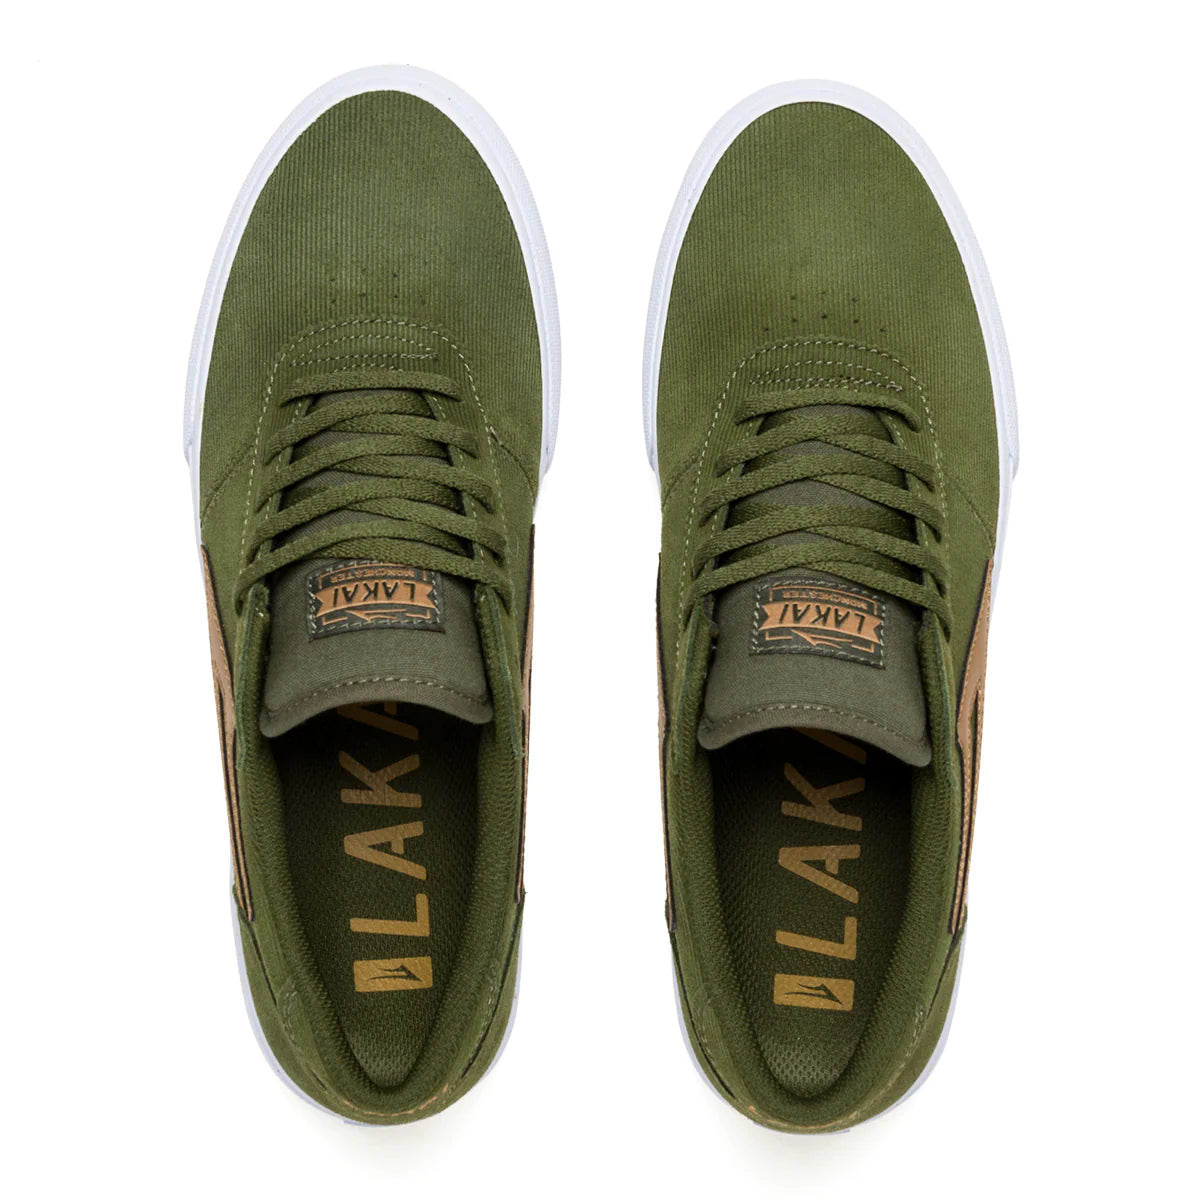 Lakai Manchester olive cord suede